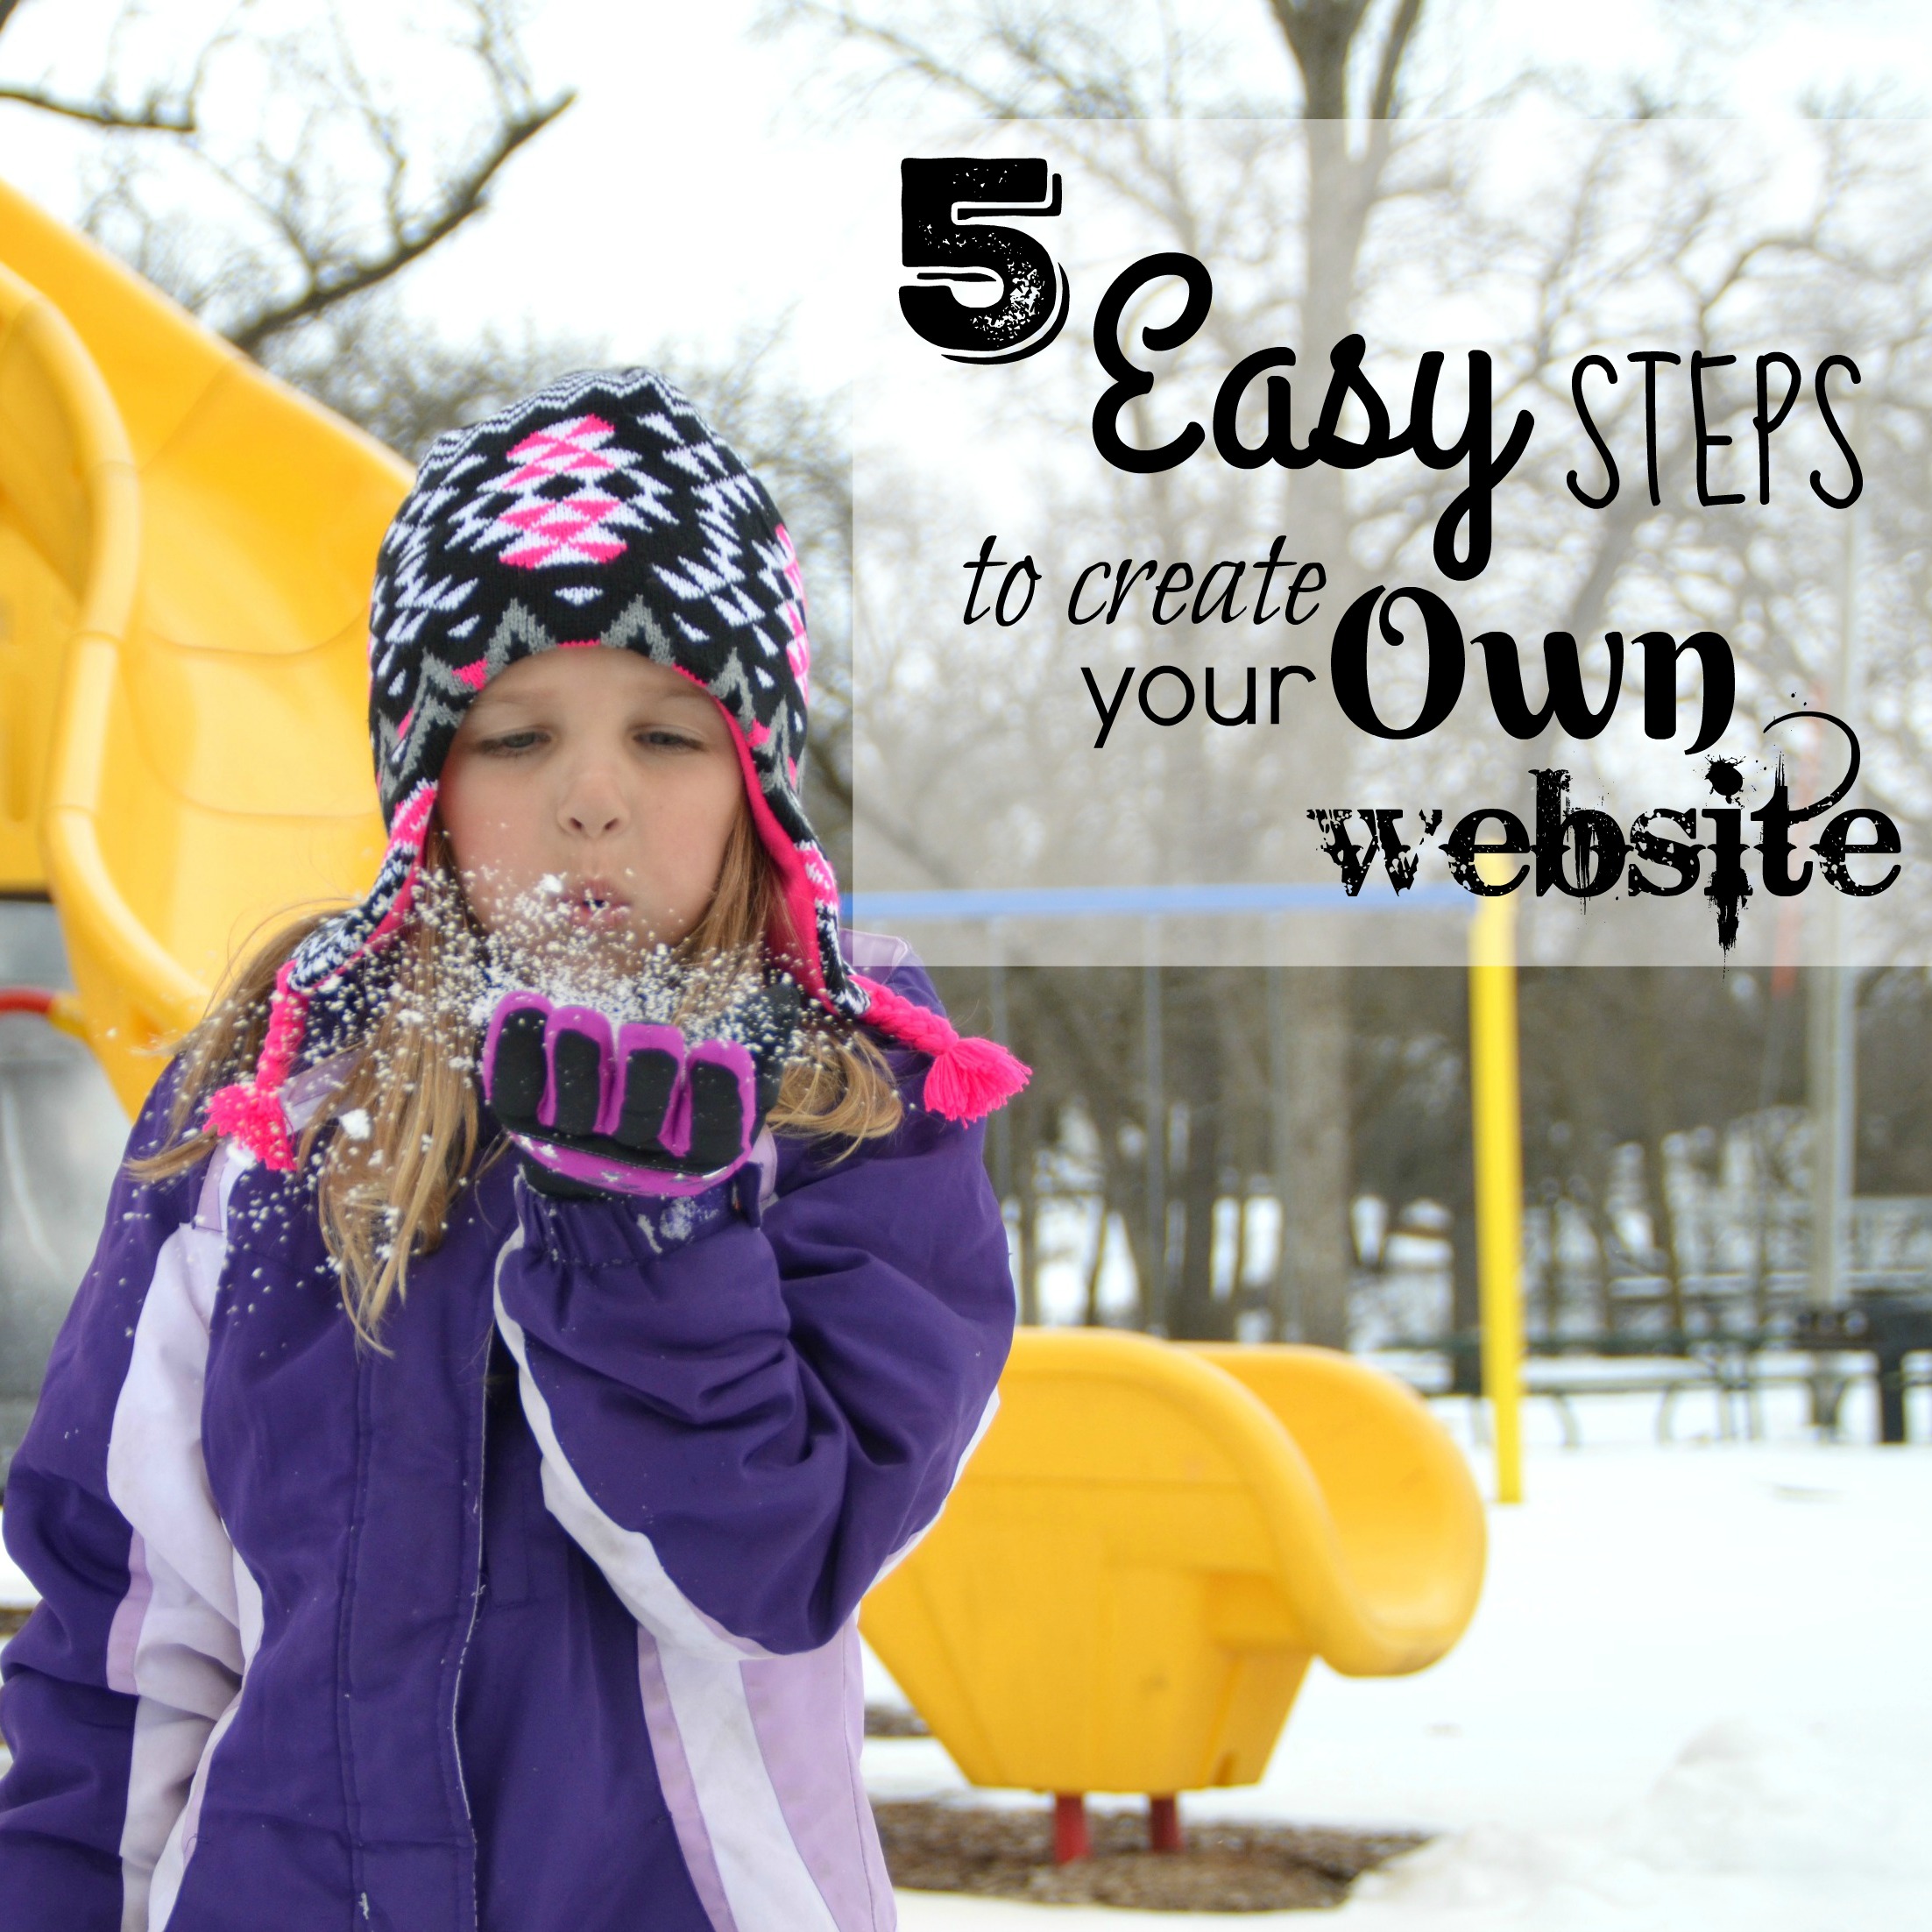 5 Easy Steps to Create Your Own Website